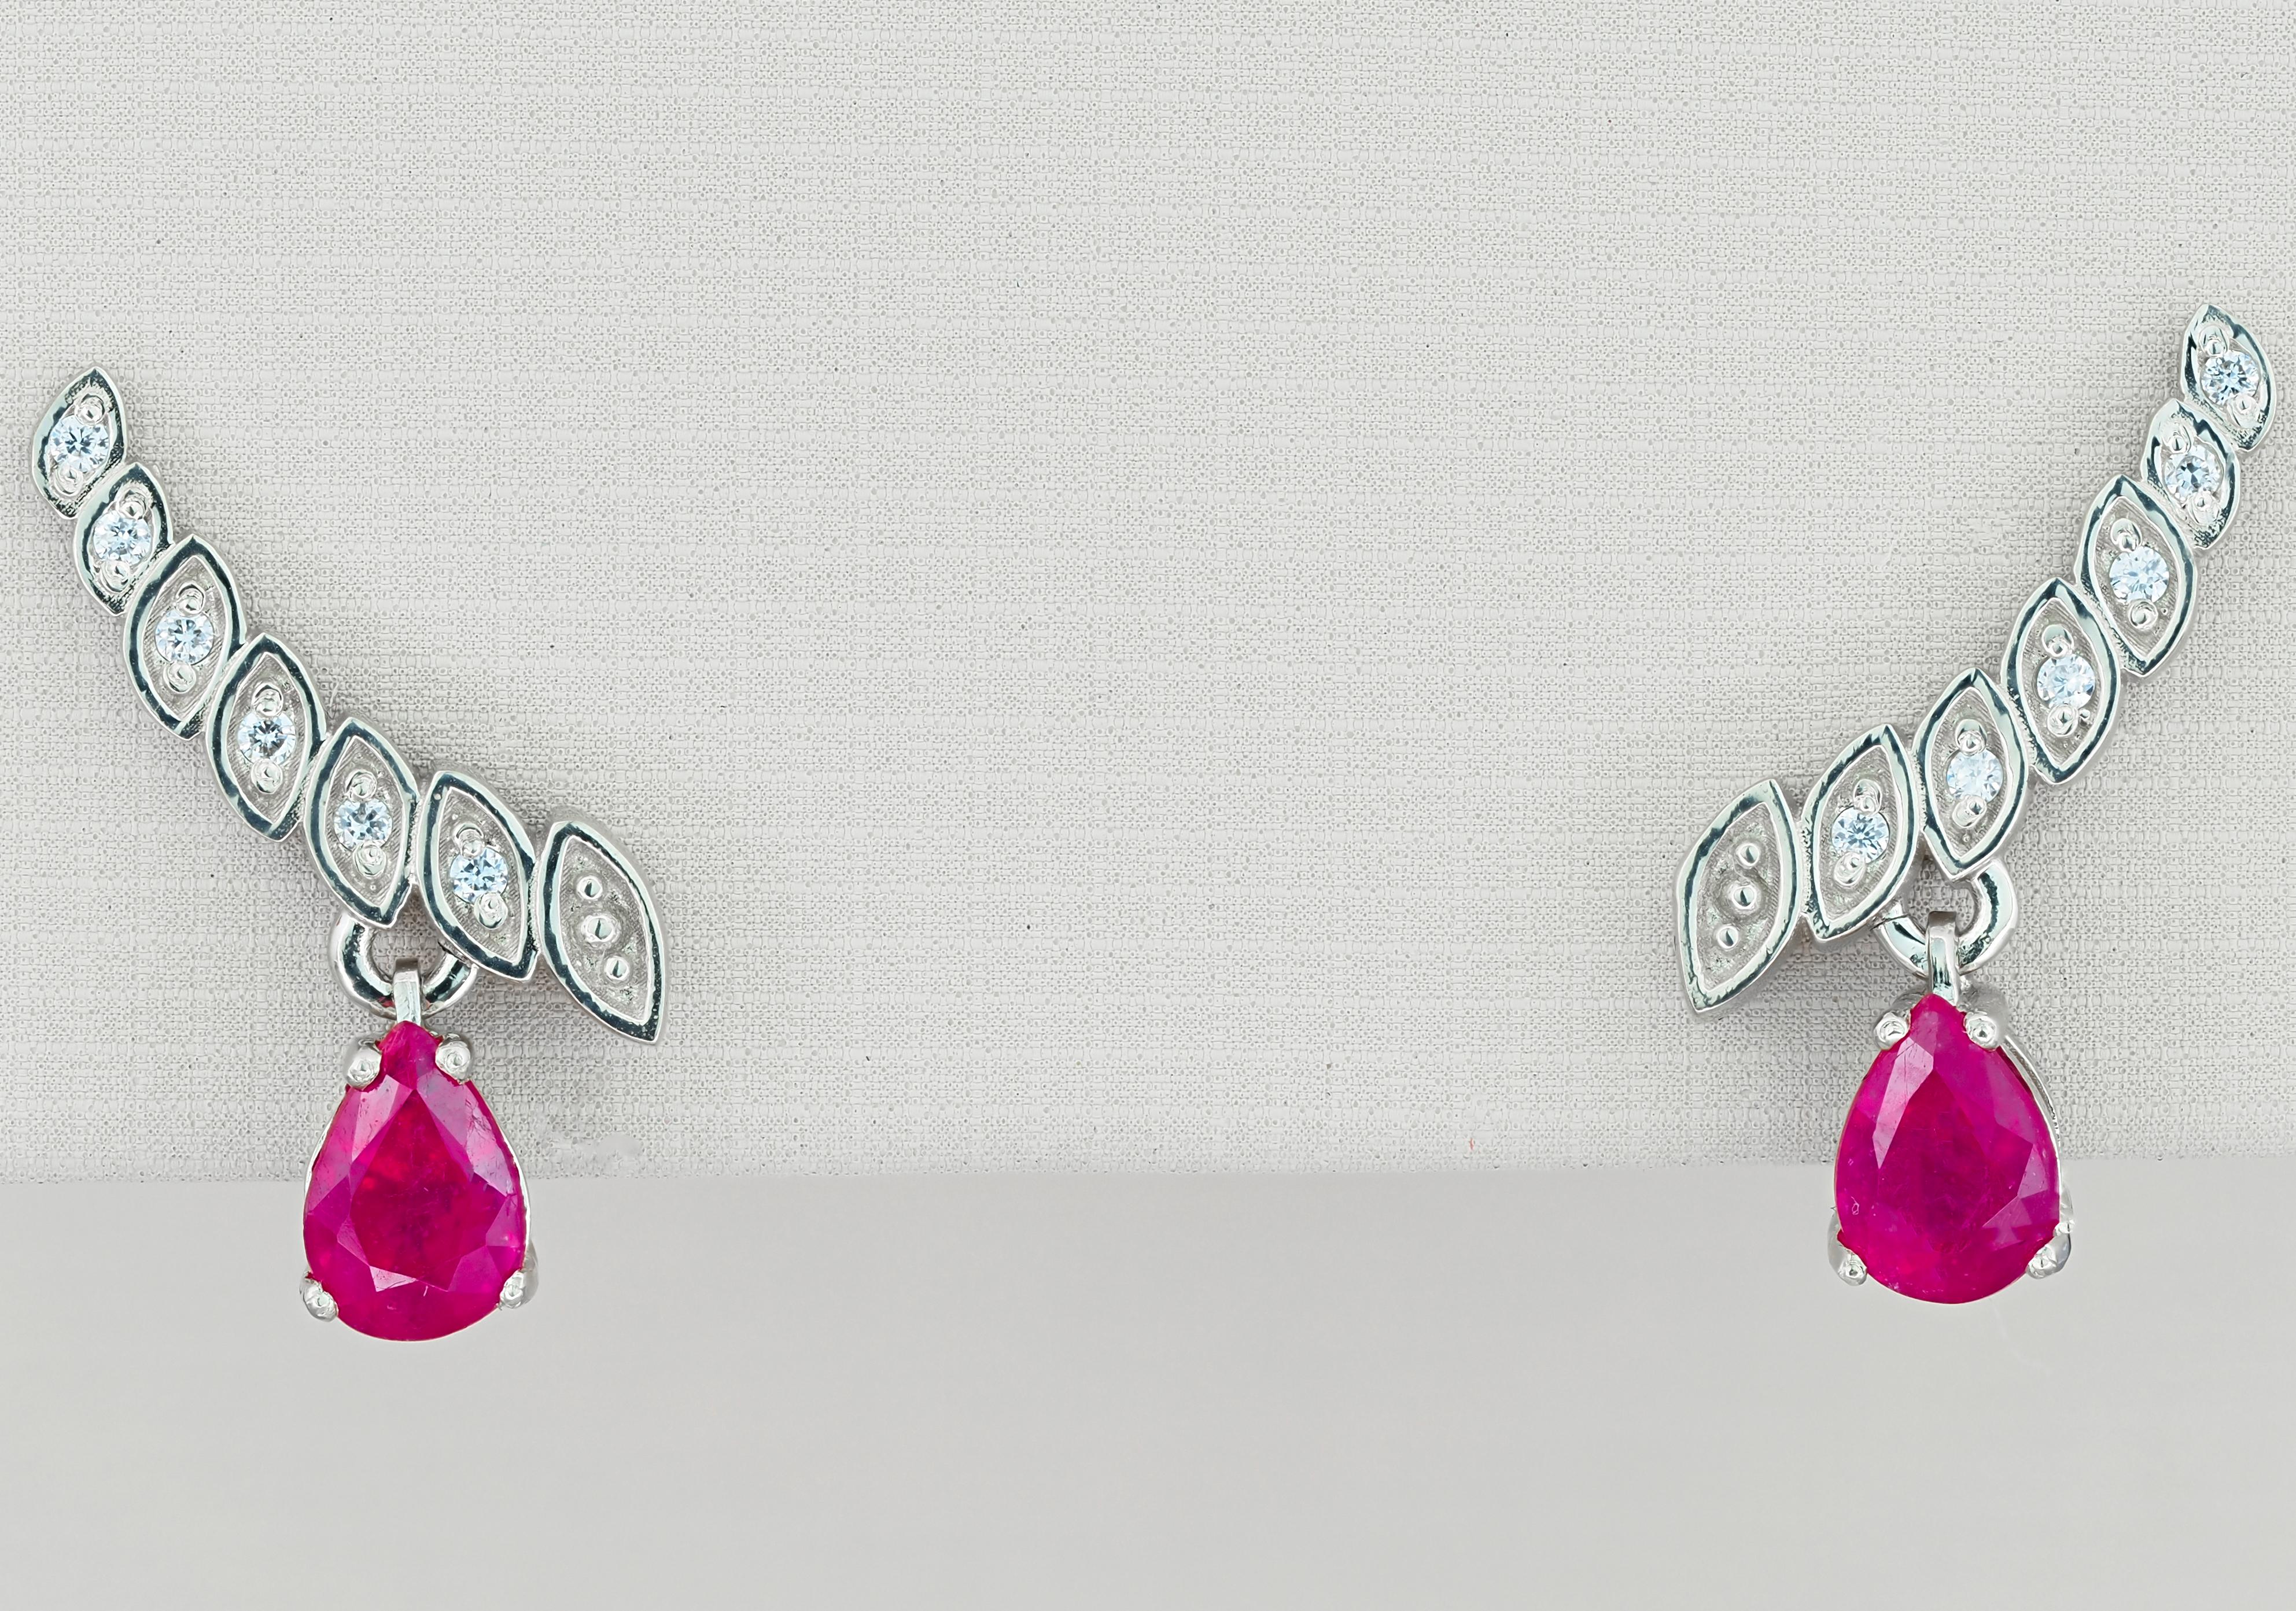 14kt solid white gold earrings with pear natural rubies and diamonds. July birthstone.
Total weight: 2.3 g.
Size: 15.5 x 10 mm.

Central stones: Natural rubies - 2 pieces
Weight: approx 1.40 ct total (6 x 4 mm each), cut - pear.
Color: red, clarity